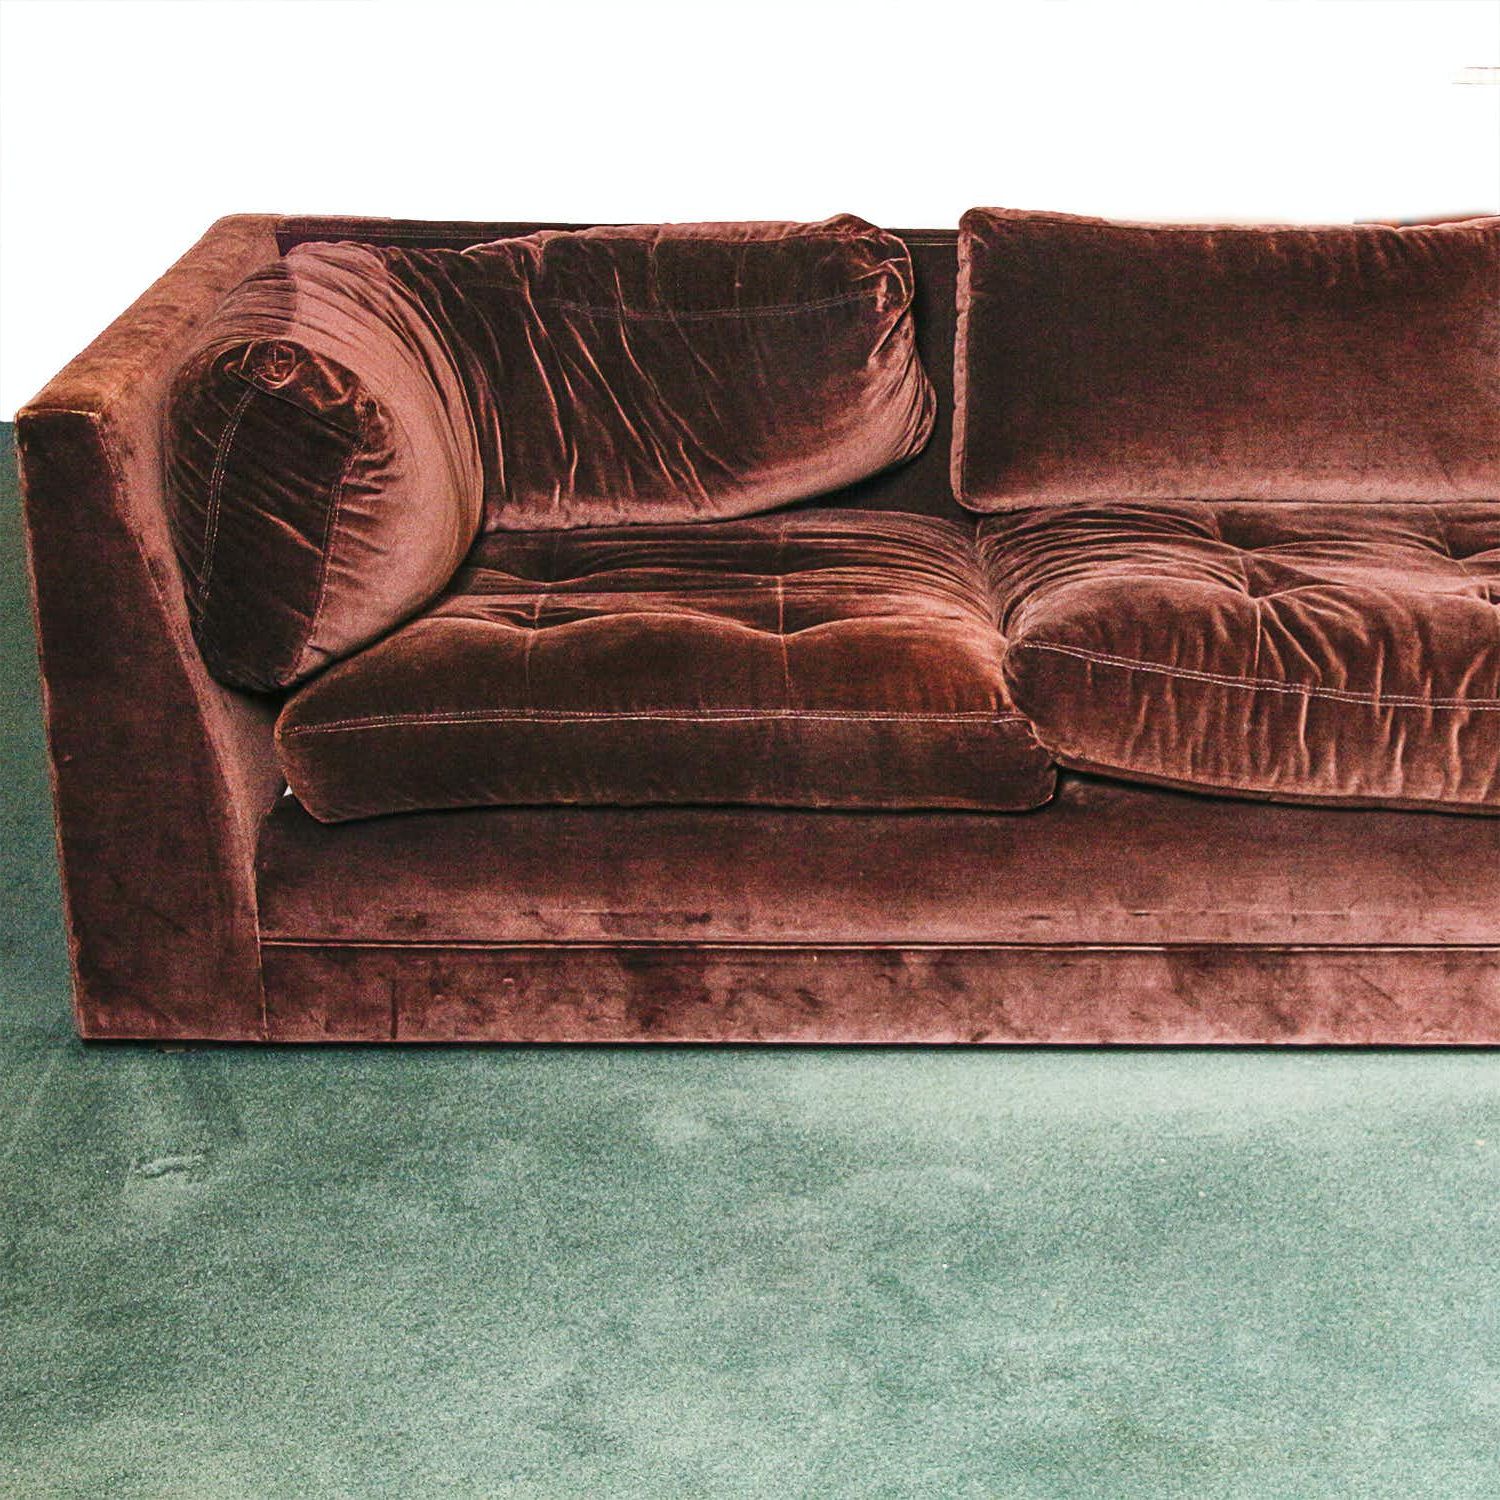 Chocolate Brown Velvet Upholstered Sectional Sofa : Ebth Regarding Sofas In Chocolate Brown (View 9 of 20)